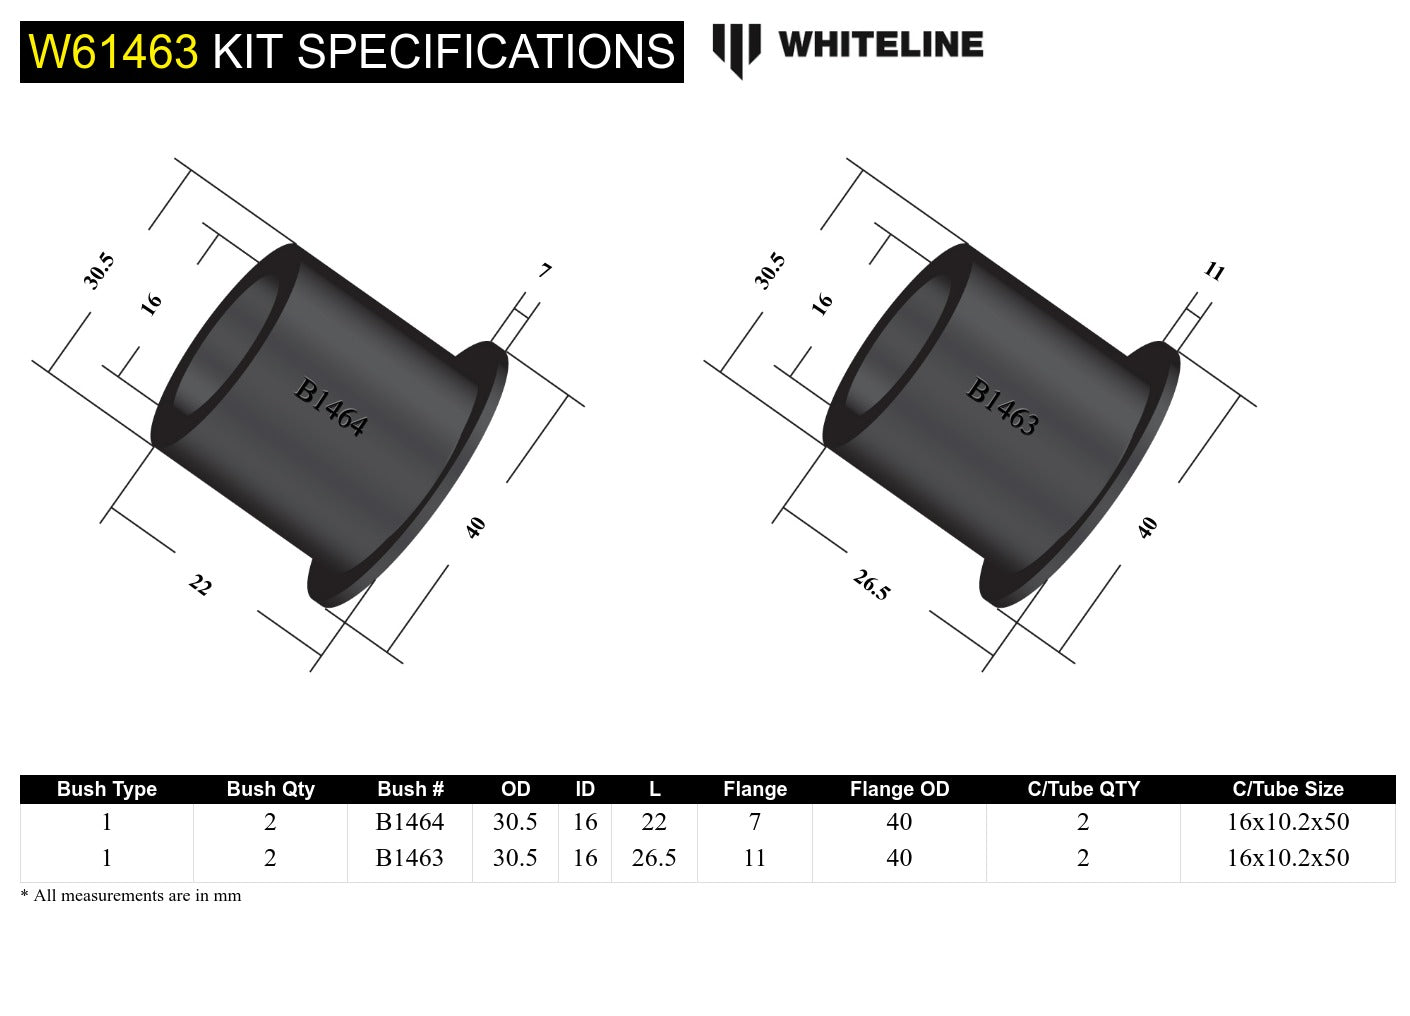 Rear Control arm - lower outer bushing